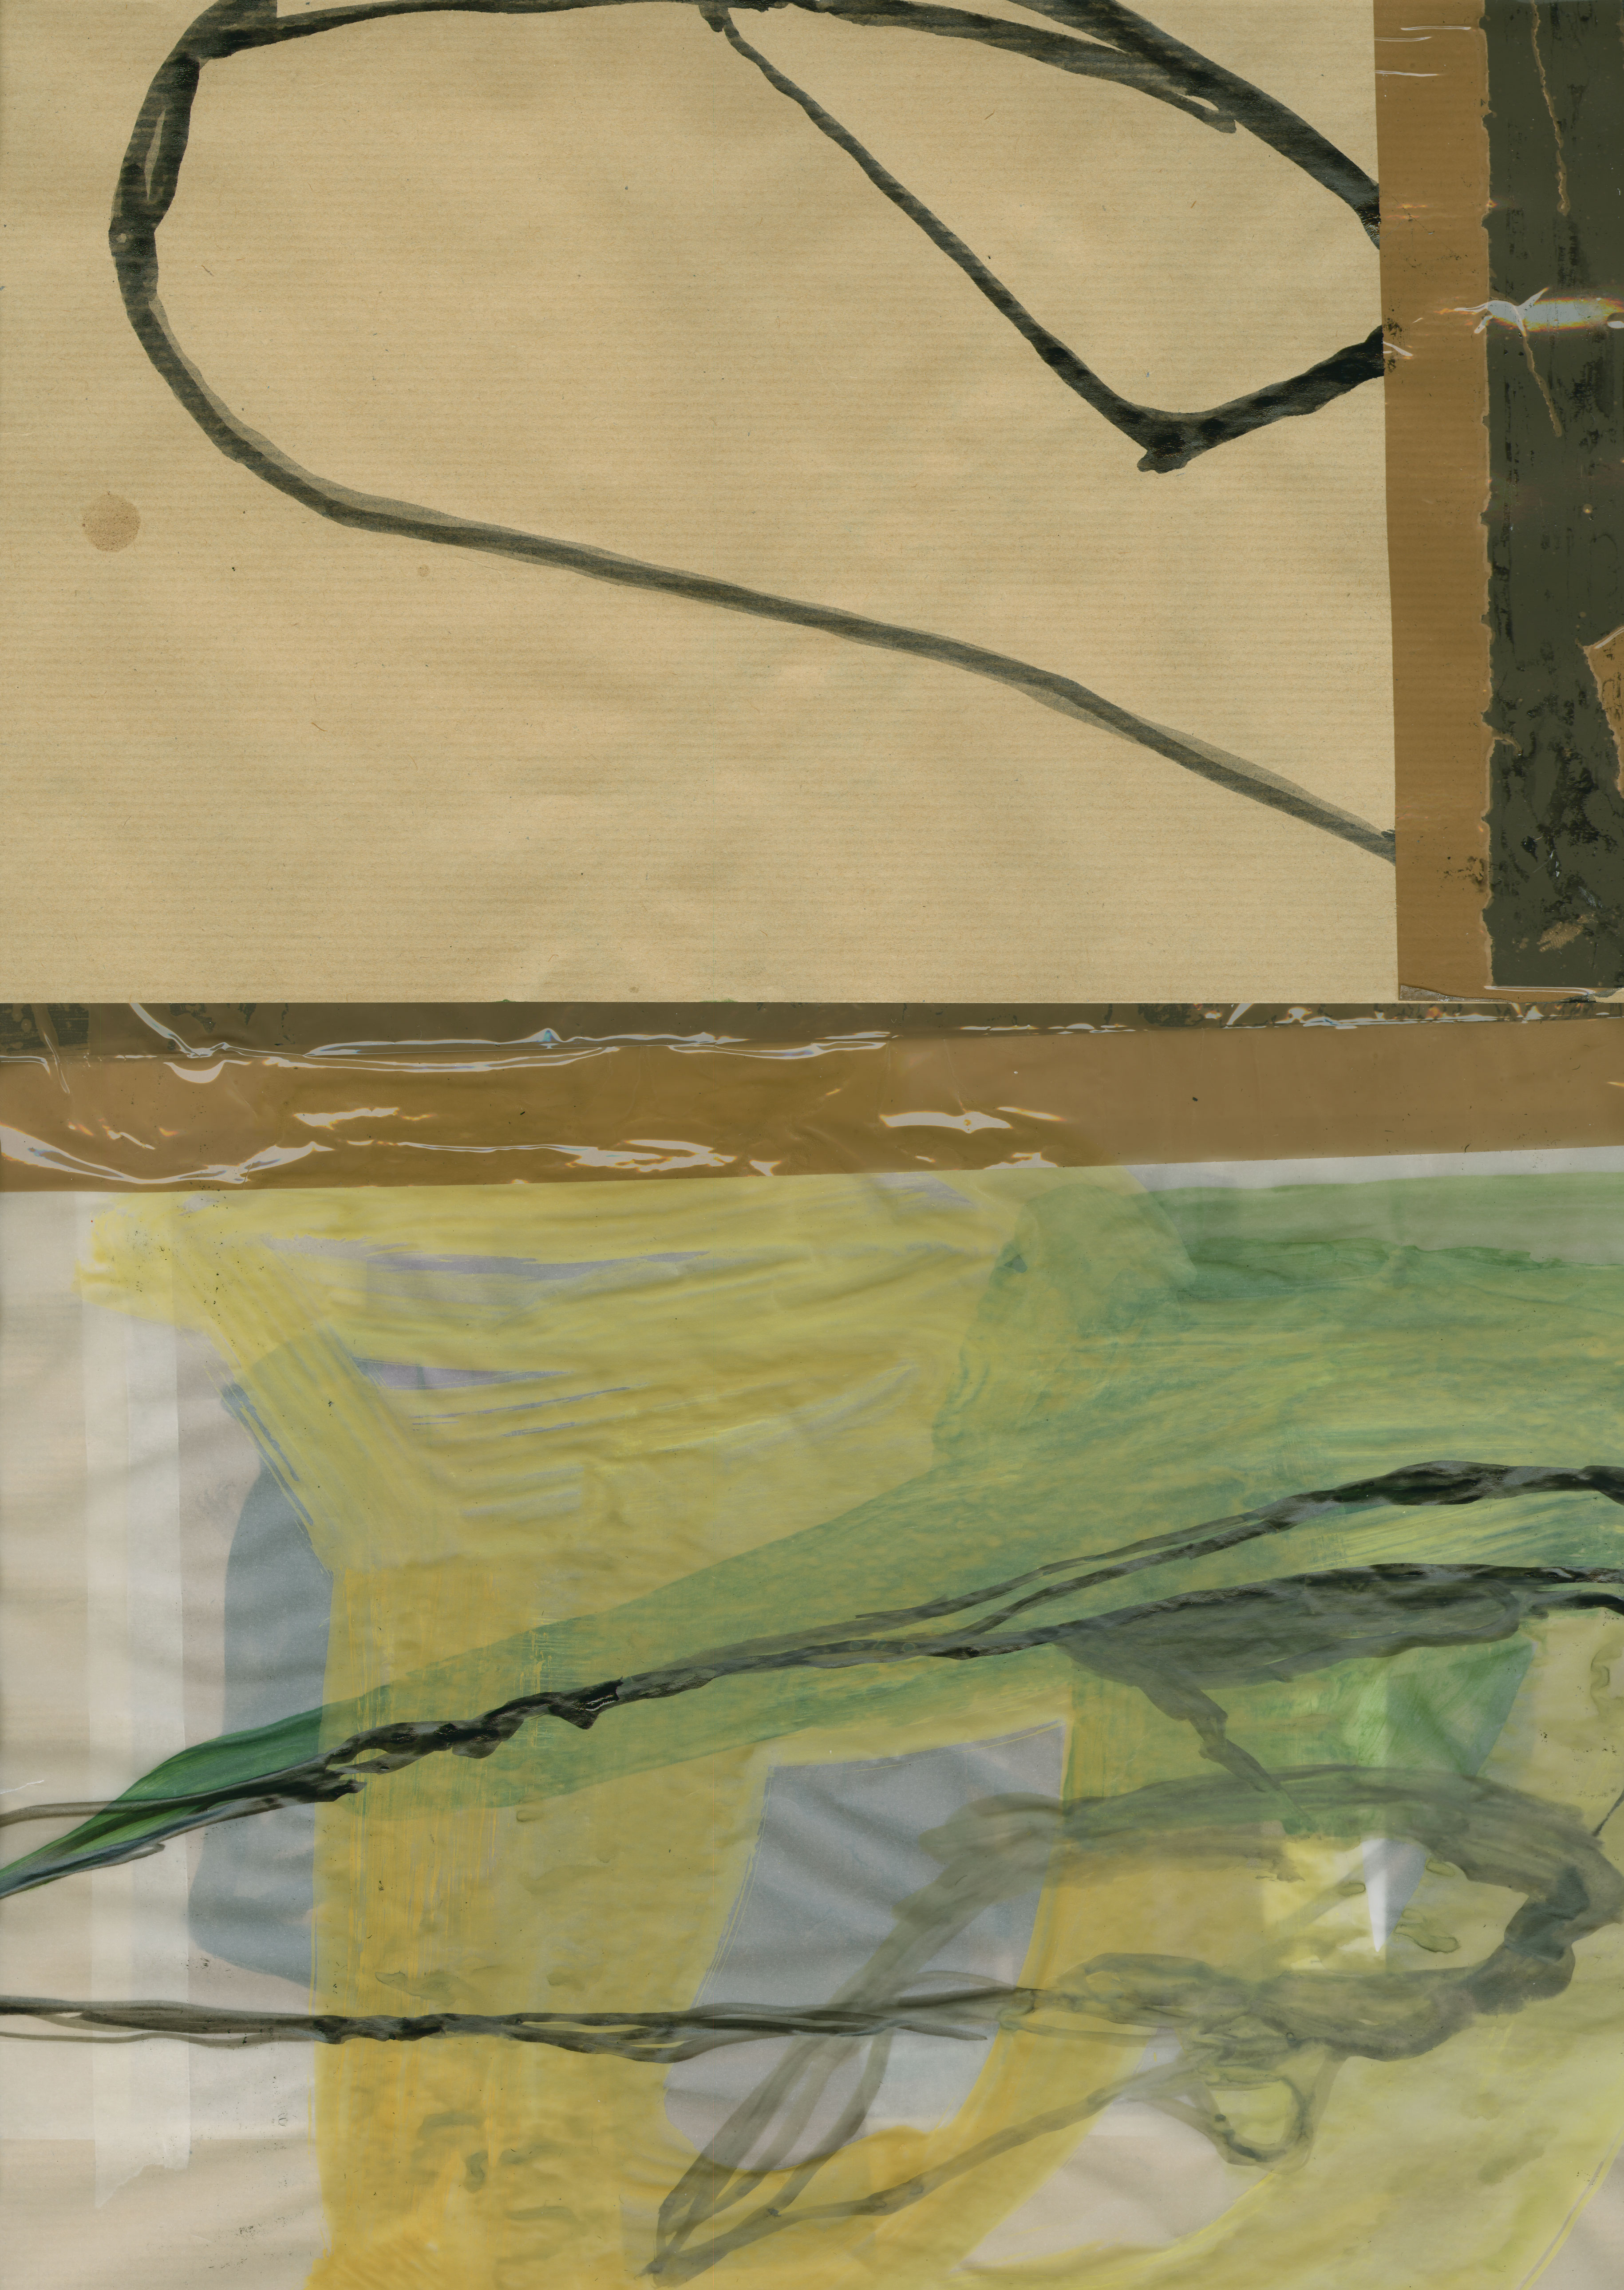 An abstract collage by artist Caroline Coolidge made from gray tracing paper, brown paper, and brown masking tape.